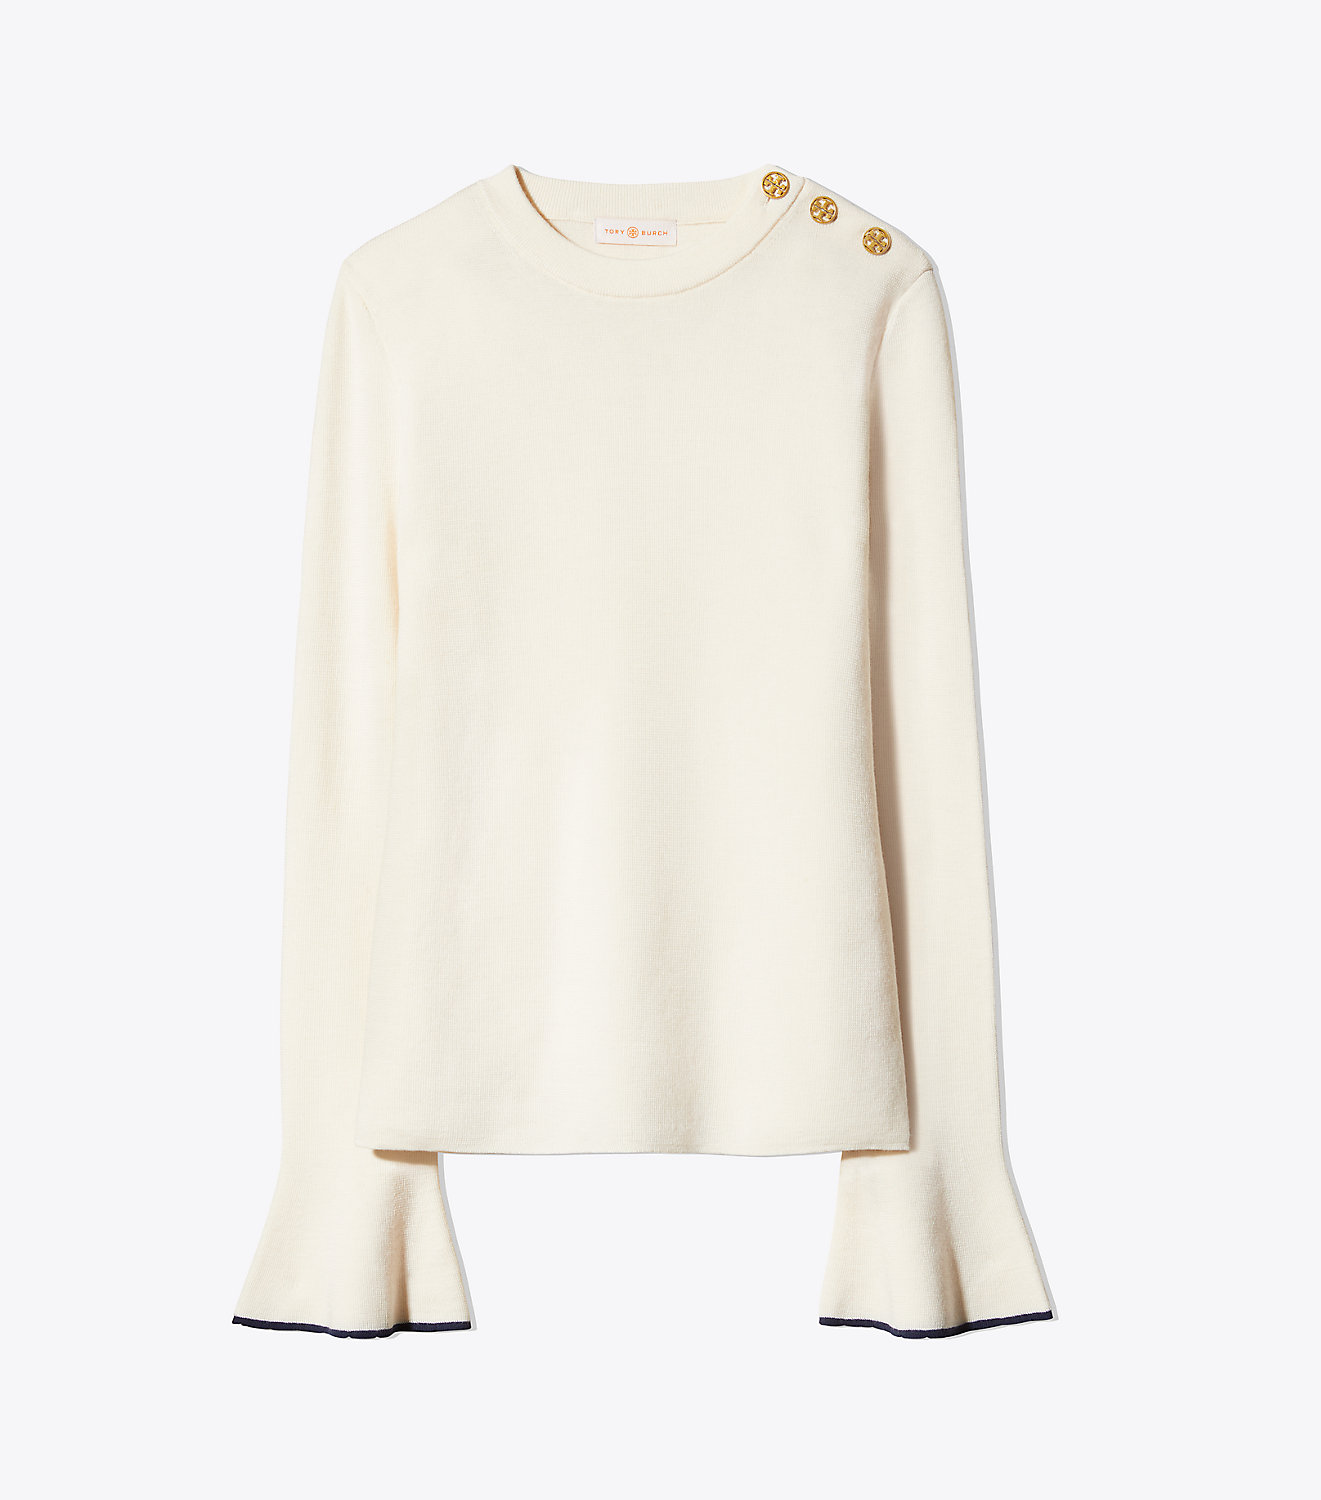 kimberly-sweater-tory-burch -feminine-knit-bell-sleeve-polished-gold-buttons-wool-katie-considers-blog-the-daily-hunt